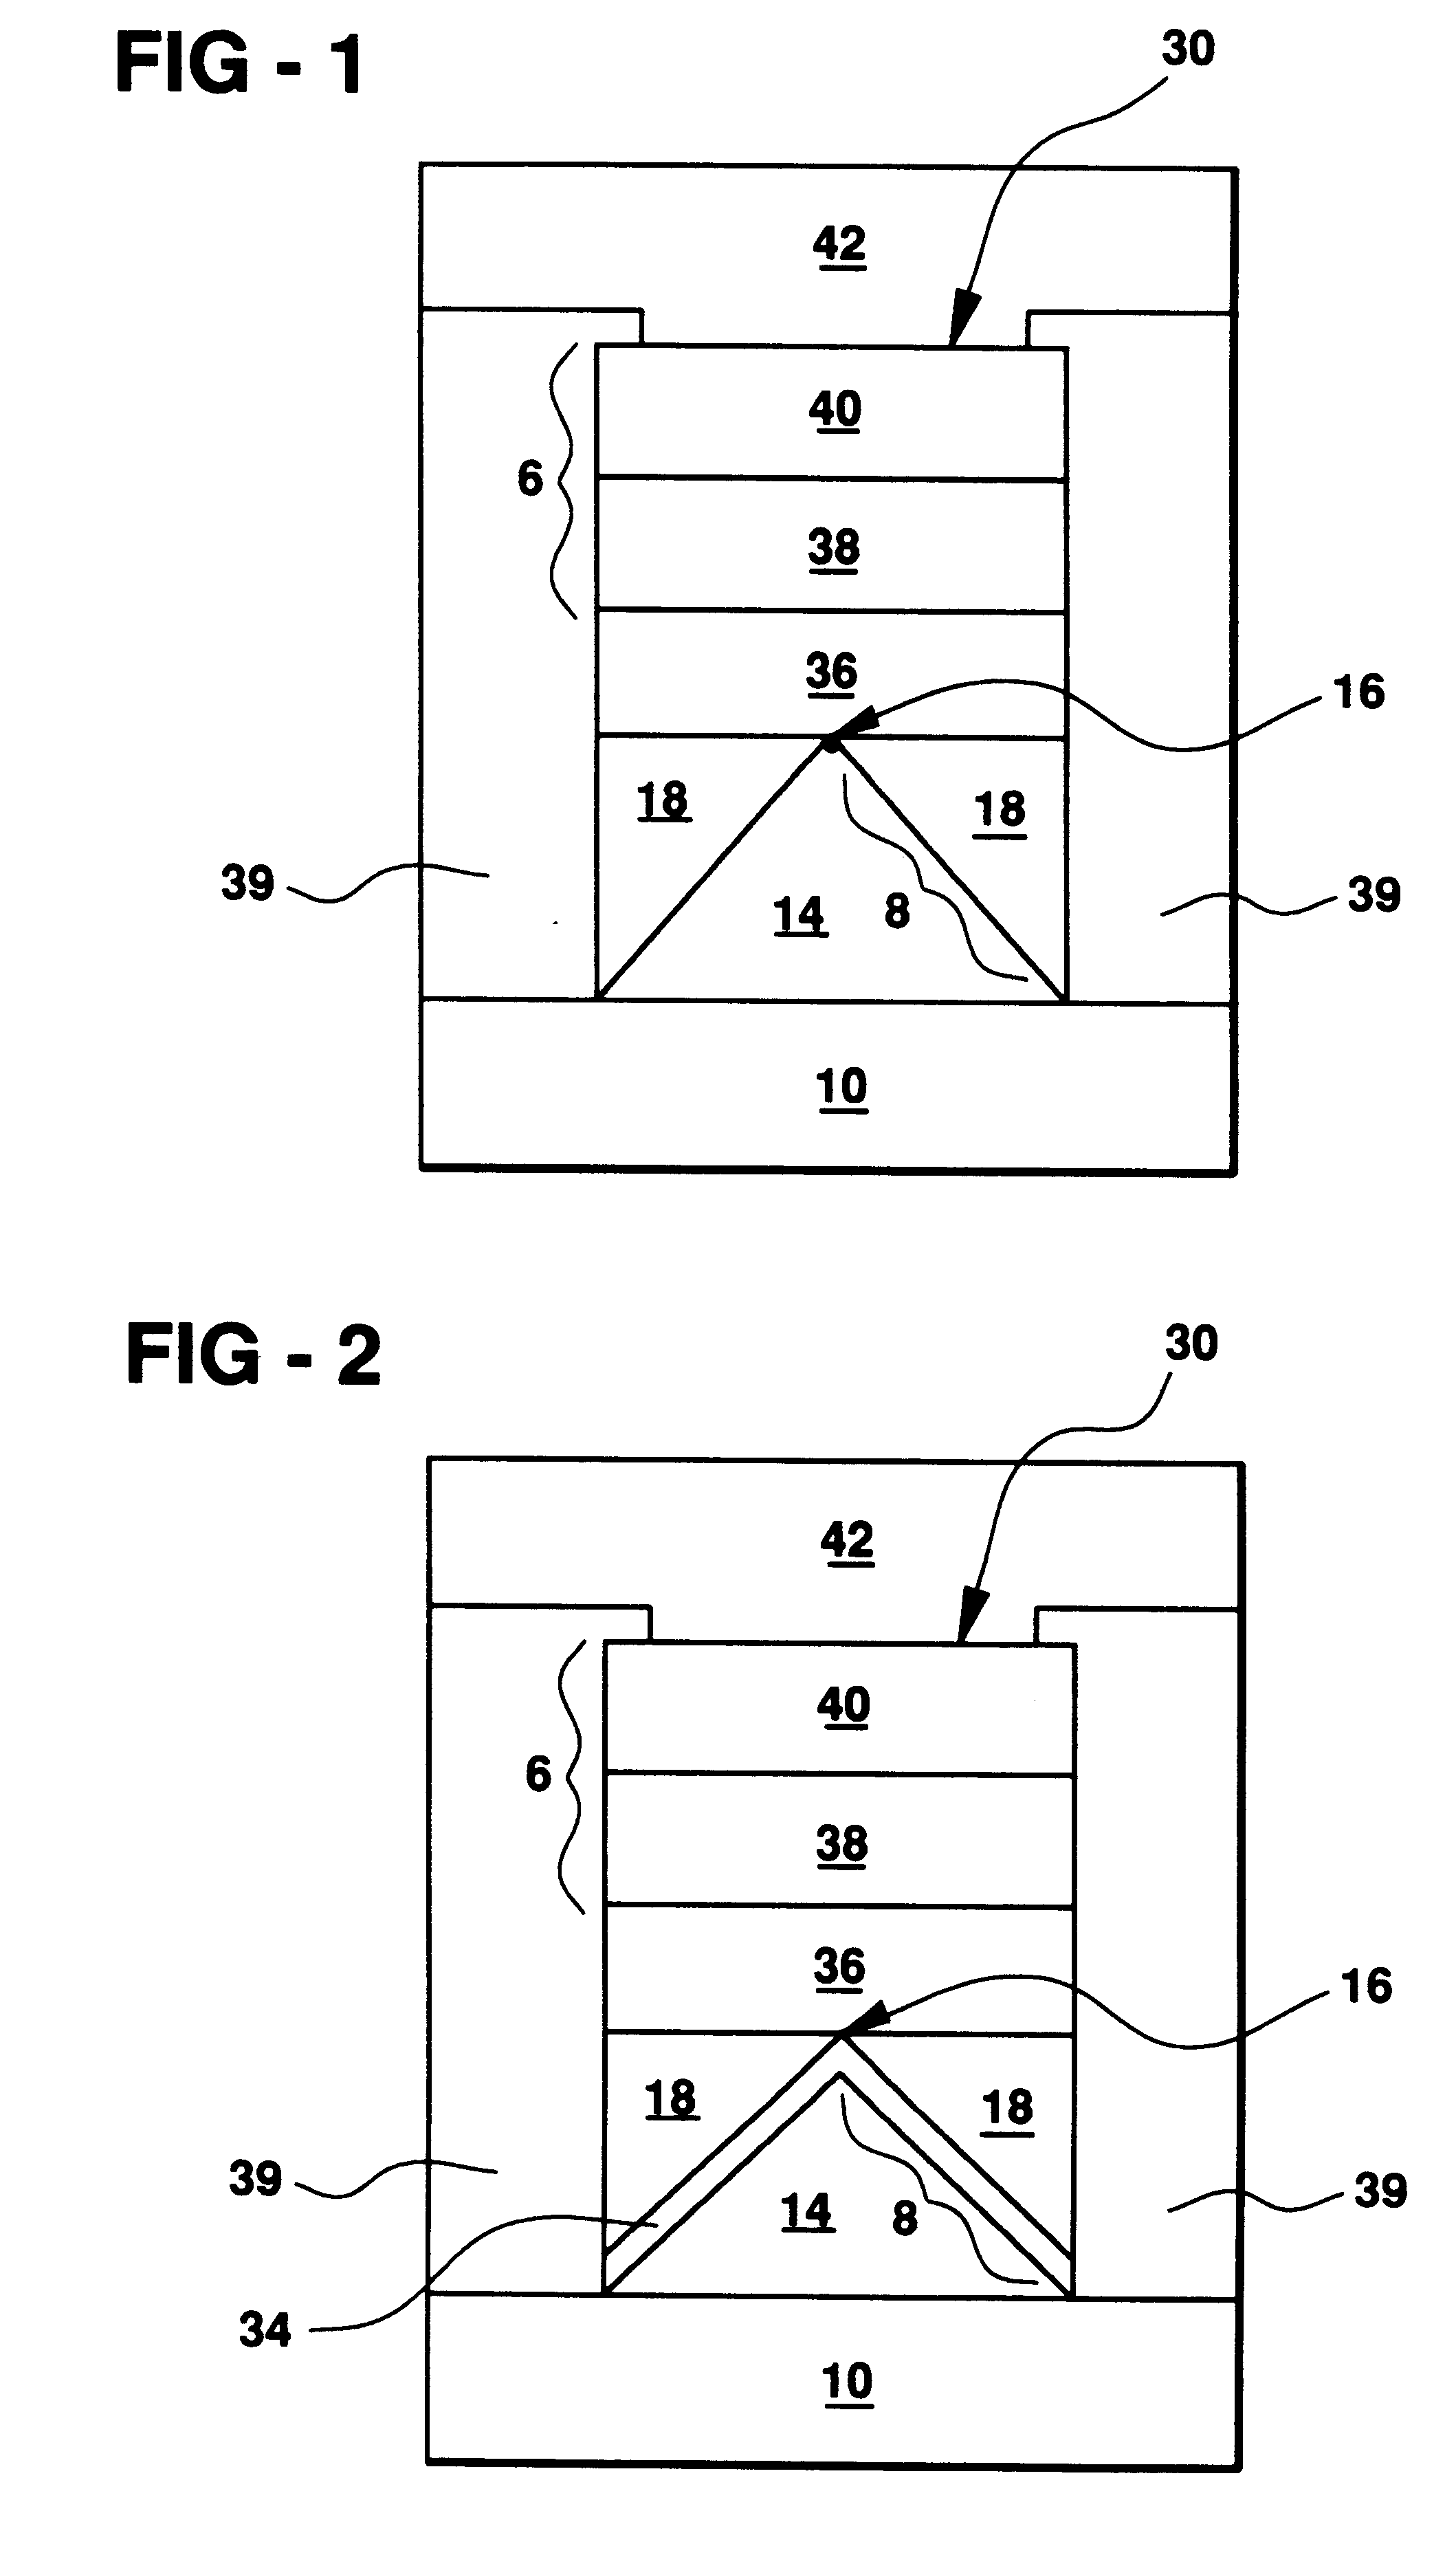 Multibit single cell memory element having tapered contact